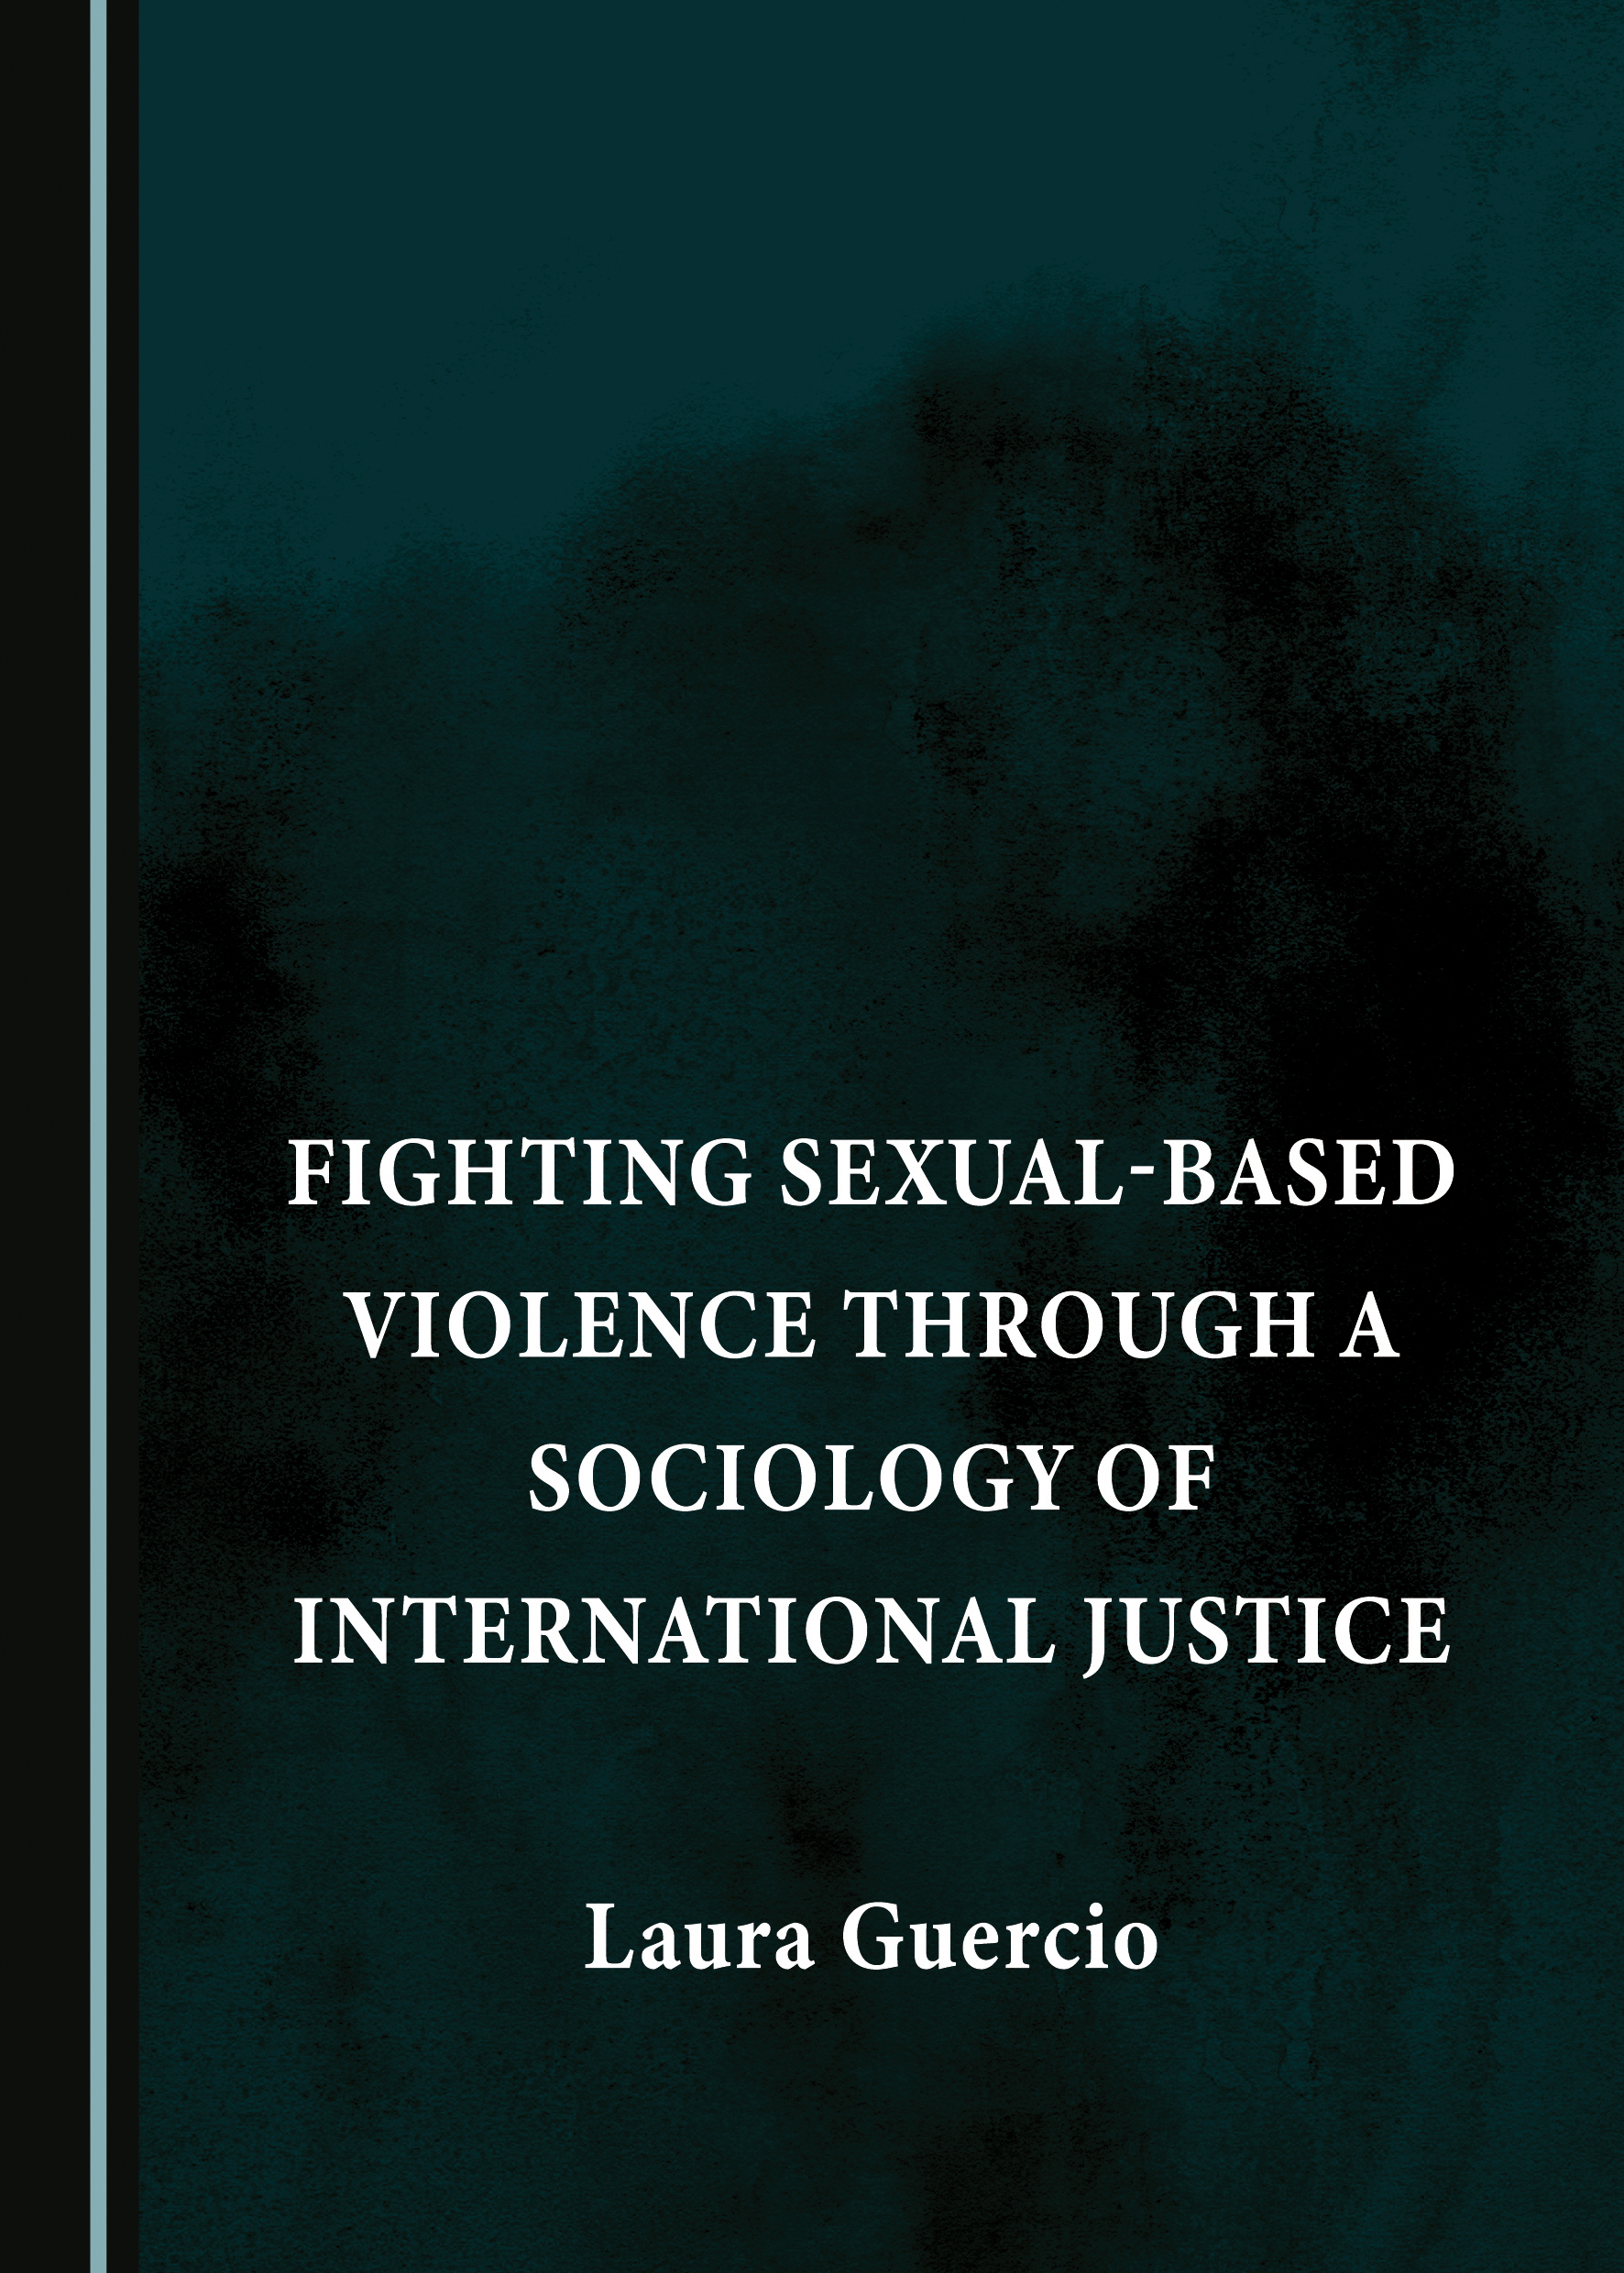 Fighting Sexual-Based Violence through a Sociology of International Justice